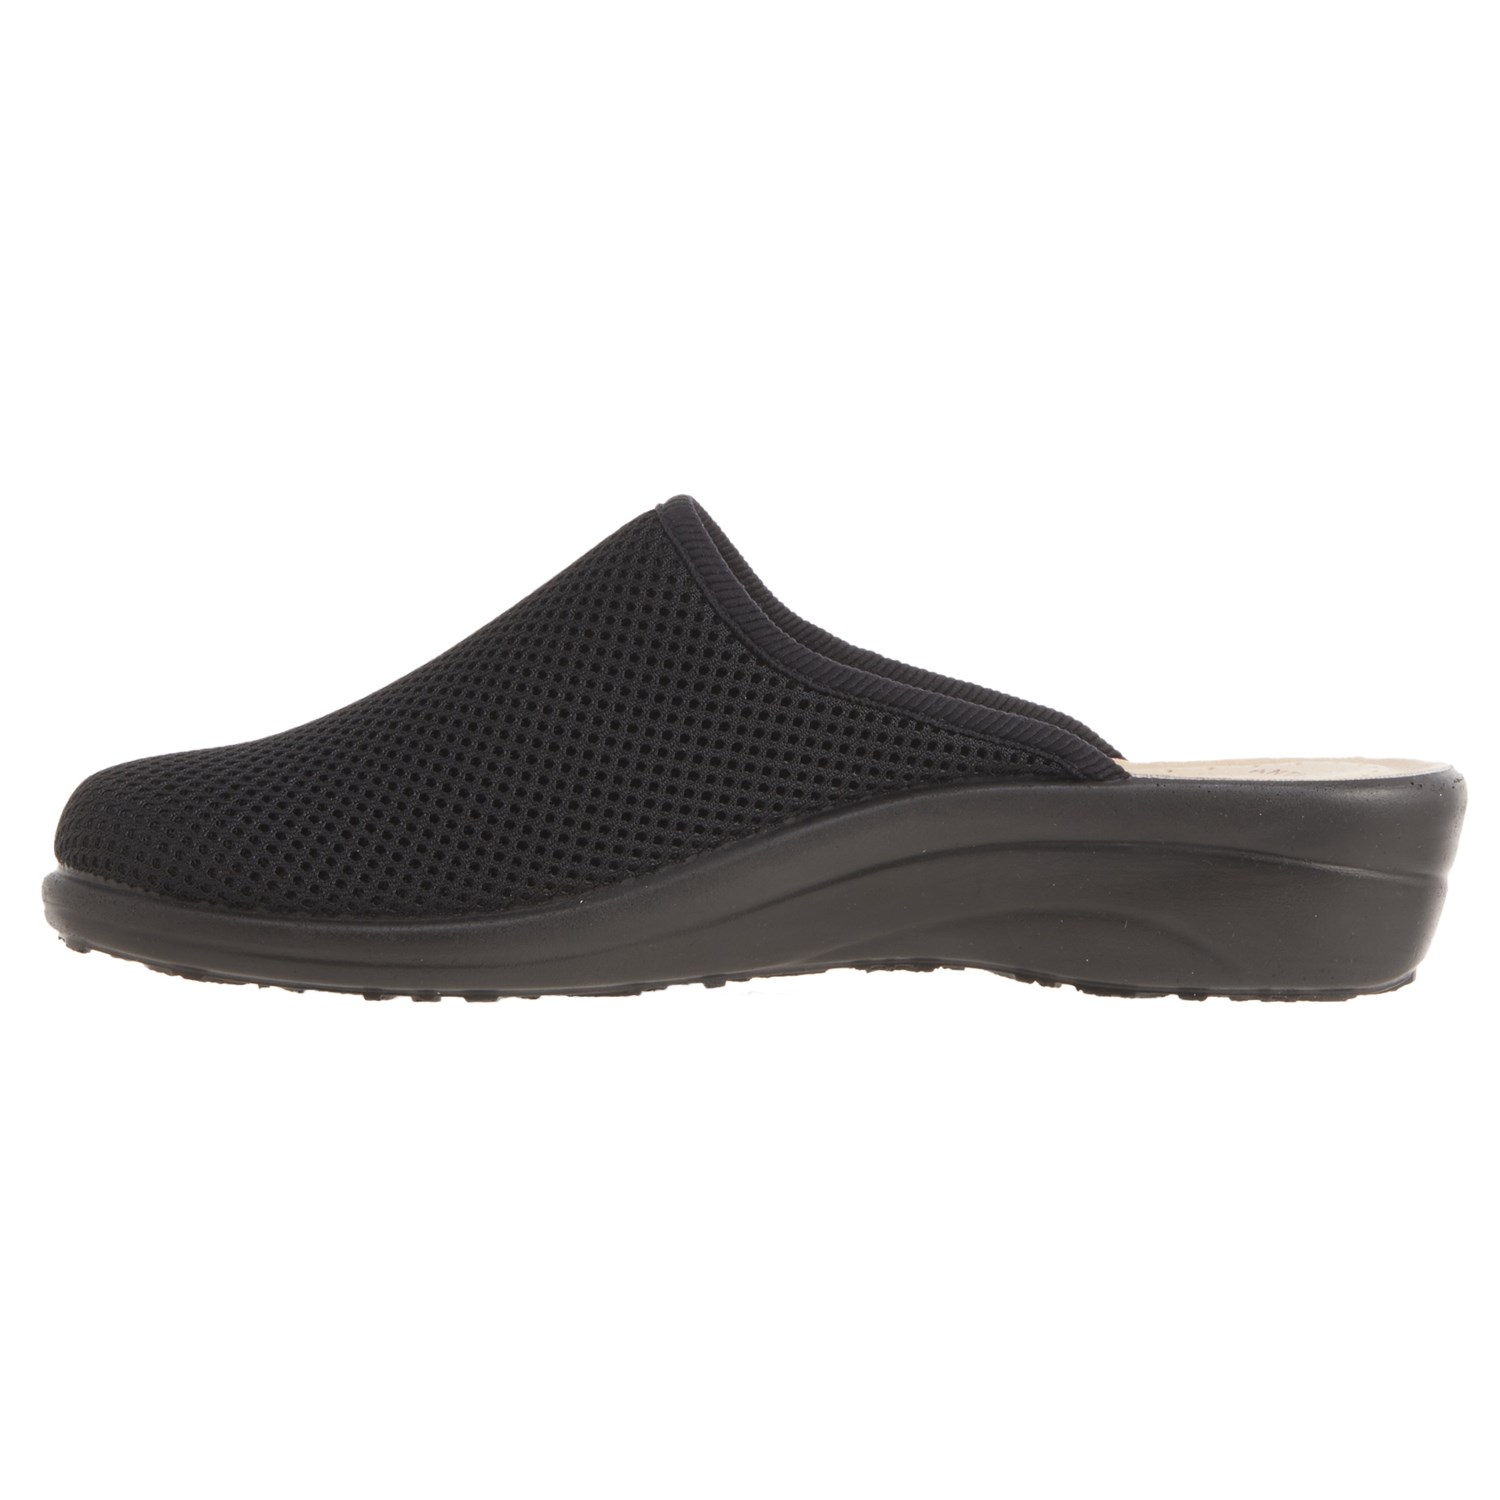 Fly Flot Made in Italy Mesh Clogs (For Women) - Save 66%